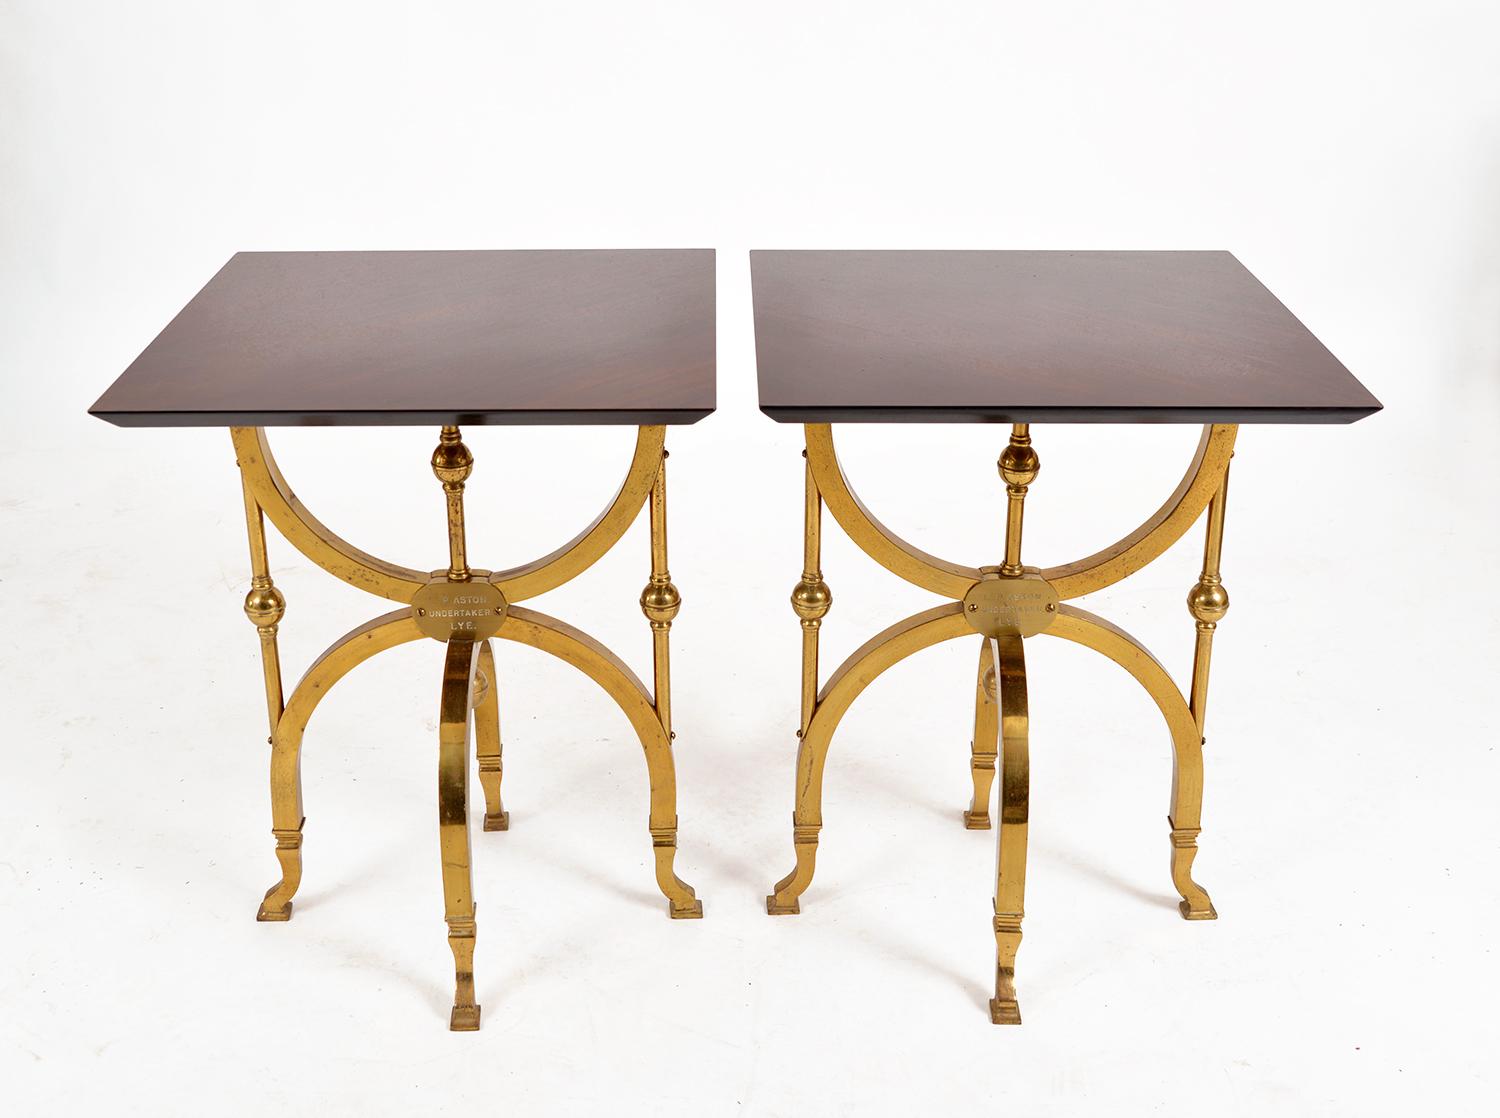 A really unusual pair of solid brass Edwardian coffin/casket stands, repurposed into a stunning and elegant pair of side tables. Each brass table base retains its original plaque, which was engraved with the undertaker – “L.P. Aston, Undertaker.